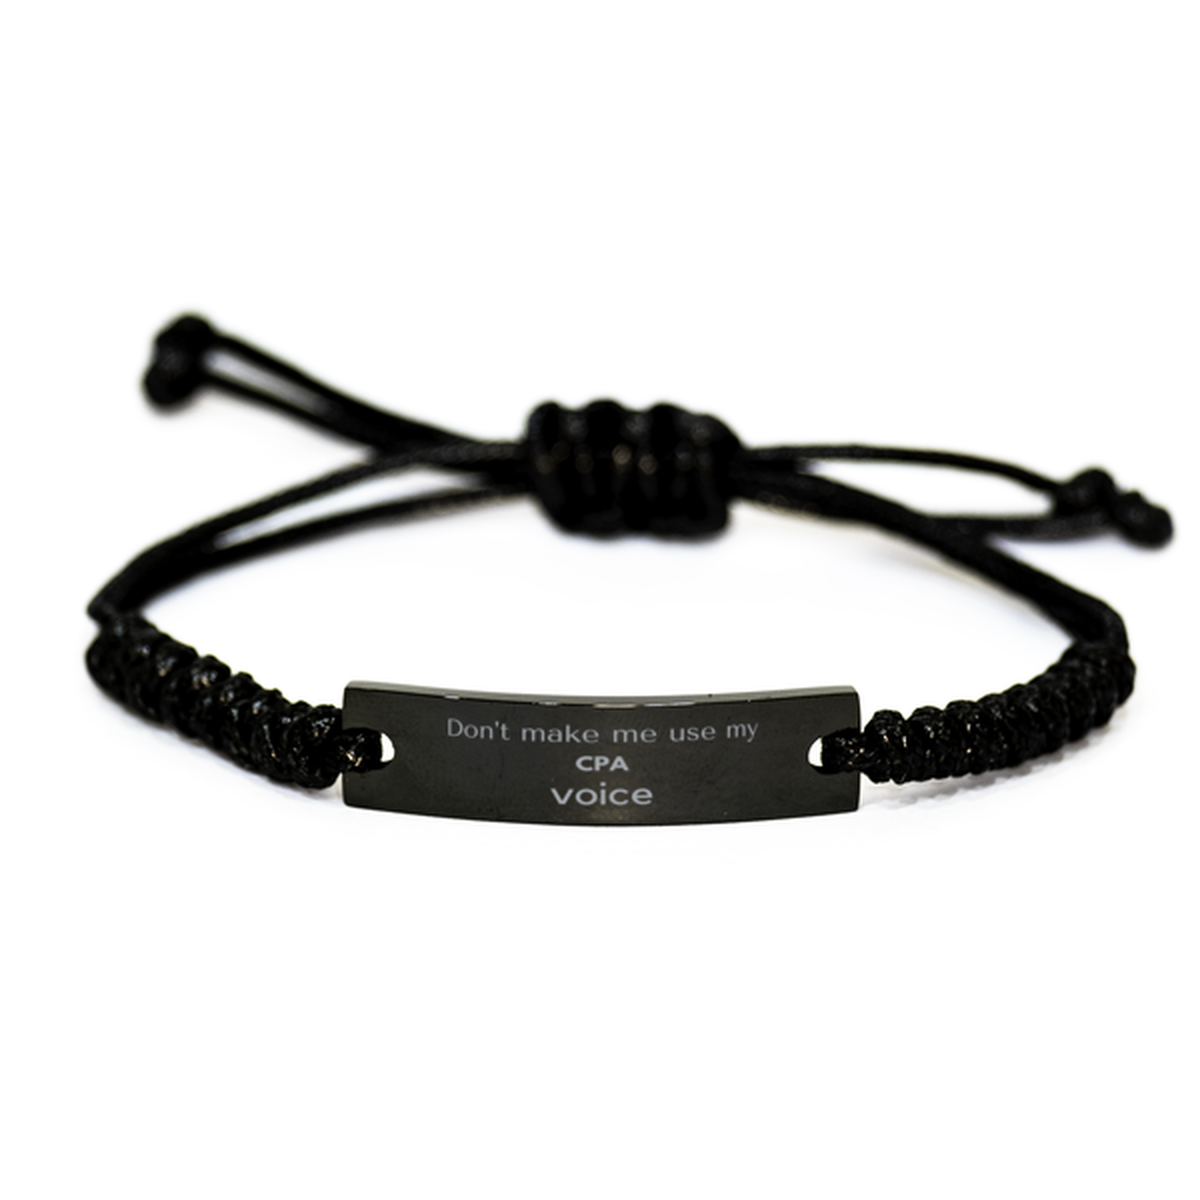 Don't make me use my CPA voice, Sarcasm CPA Gifts, Christmas CPA Black Rope Bracelet Birthday Unique Gifts For CPA Coworkers, Men, Women, Colleague, Friends